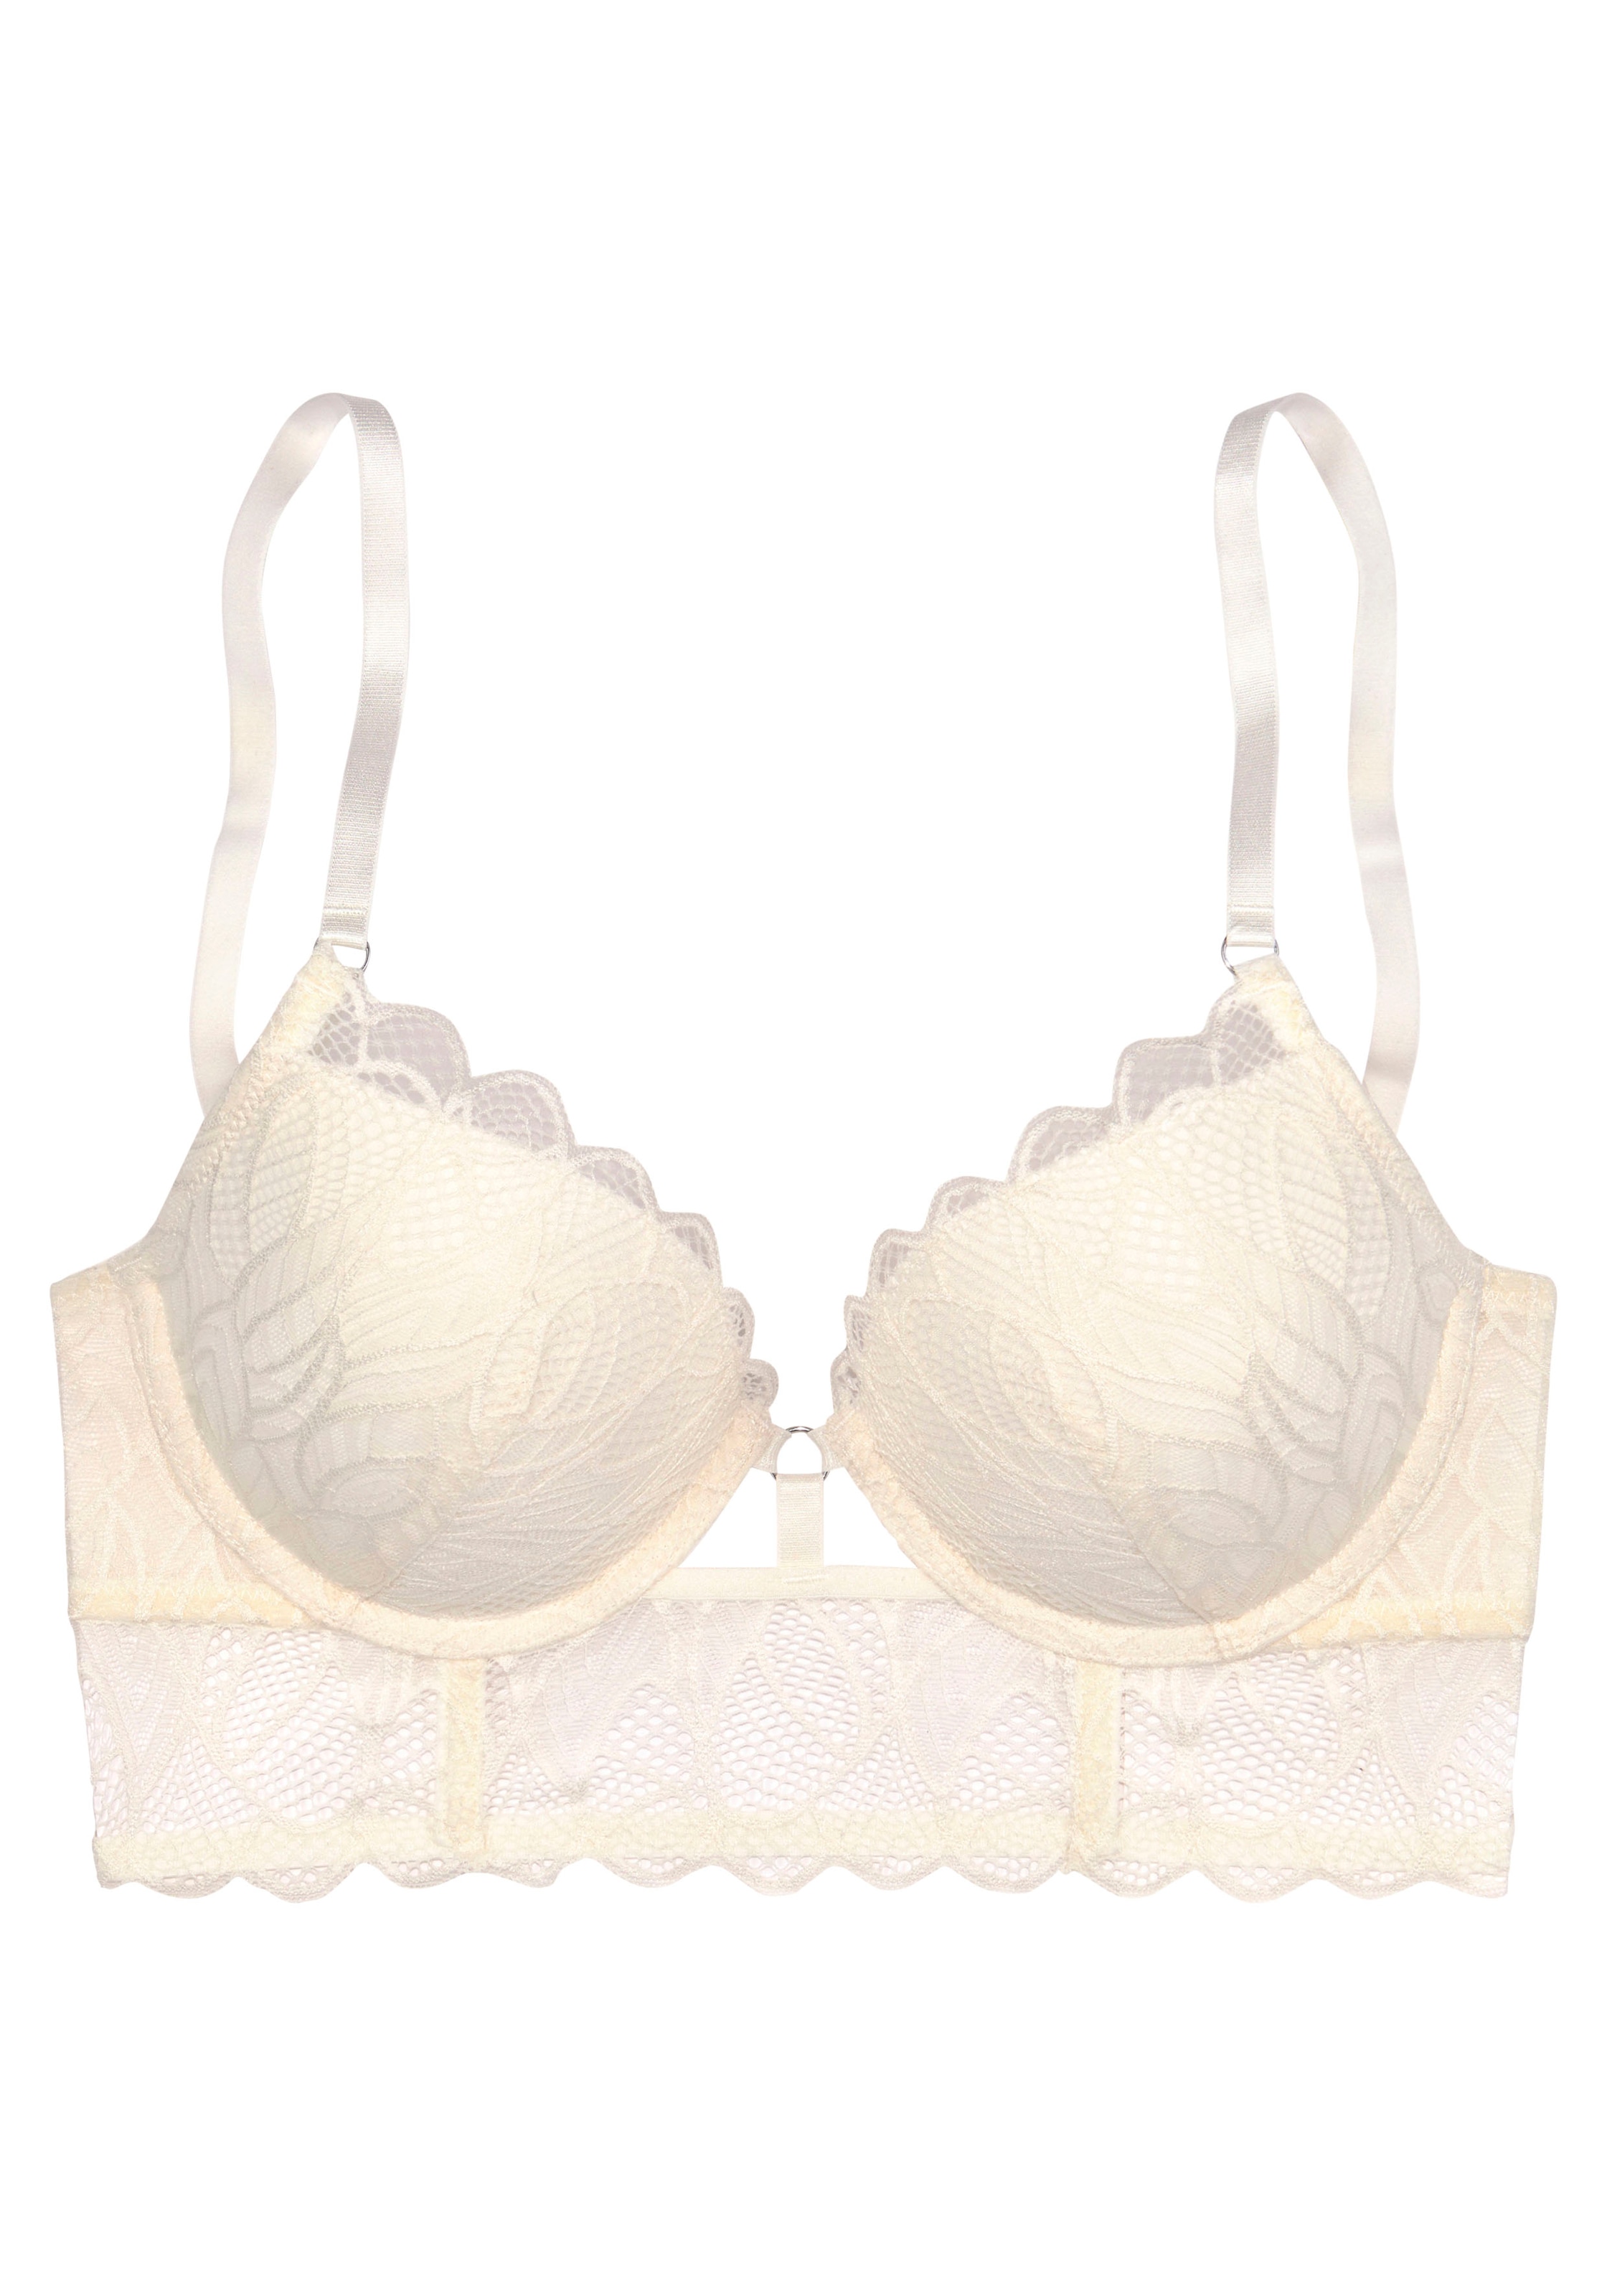 LASCANA Push-up-BH, in Bustier Form, sexy Dessous